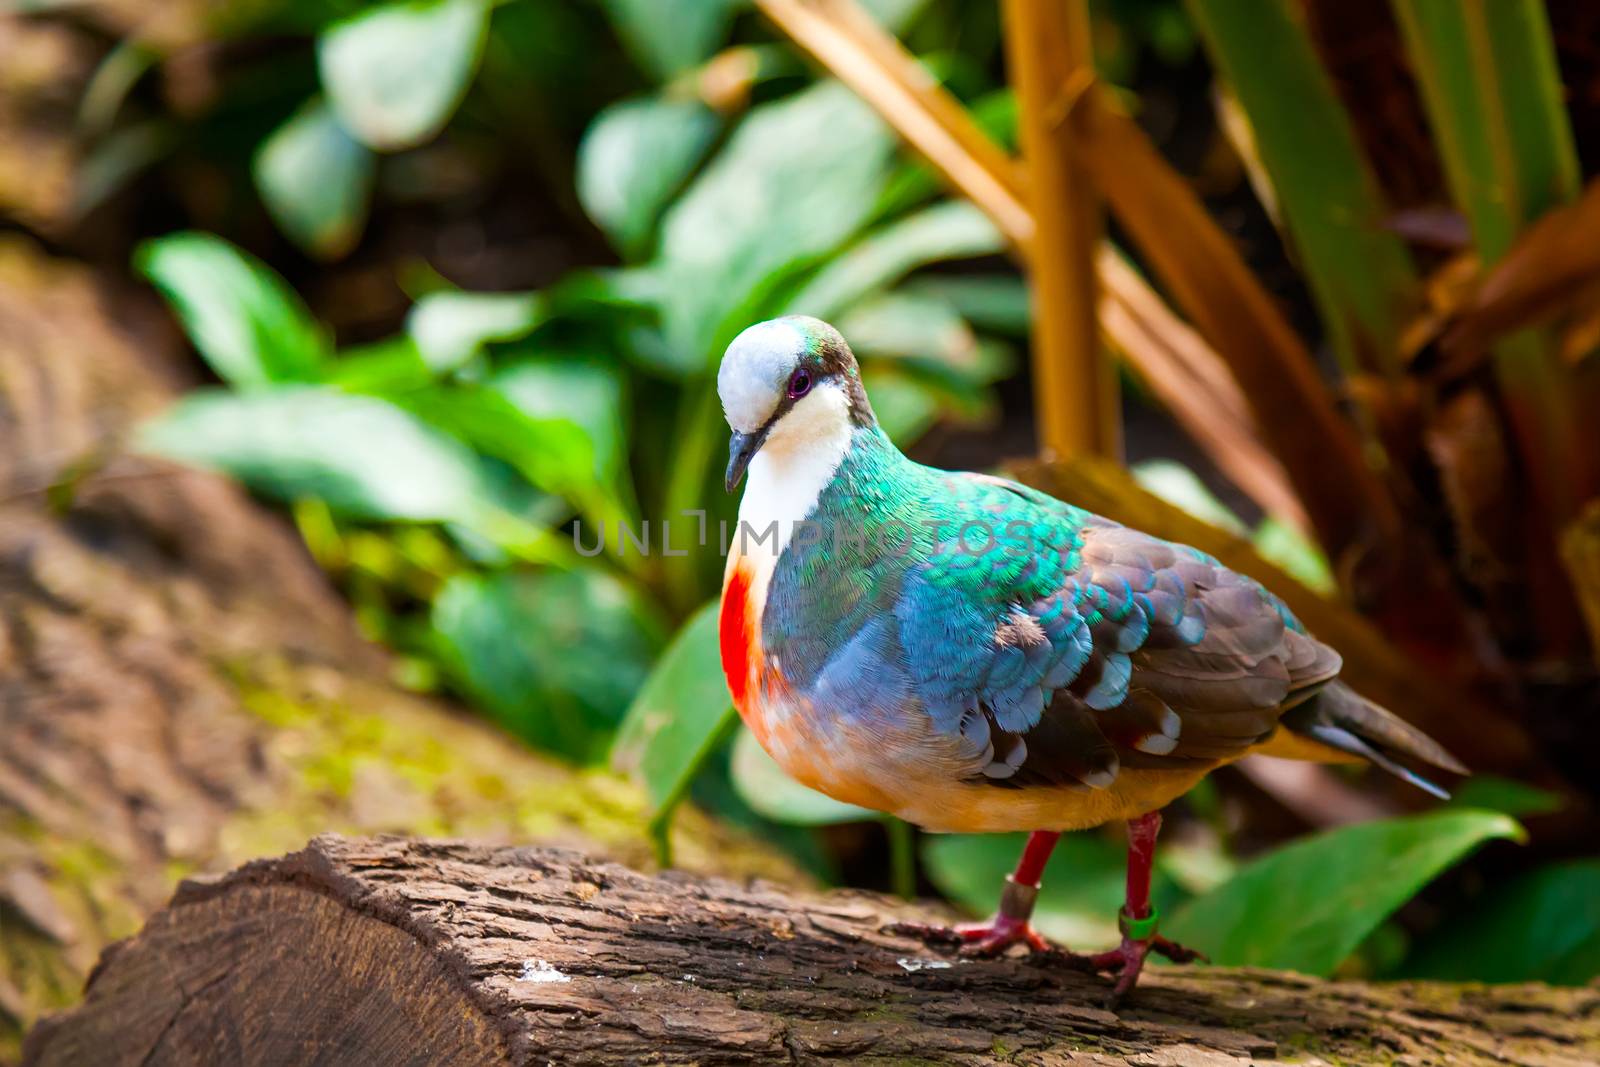 The pigeon, is very colorful.